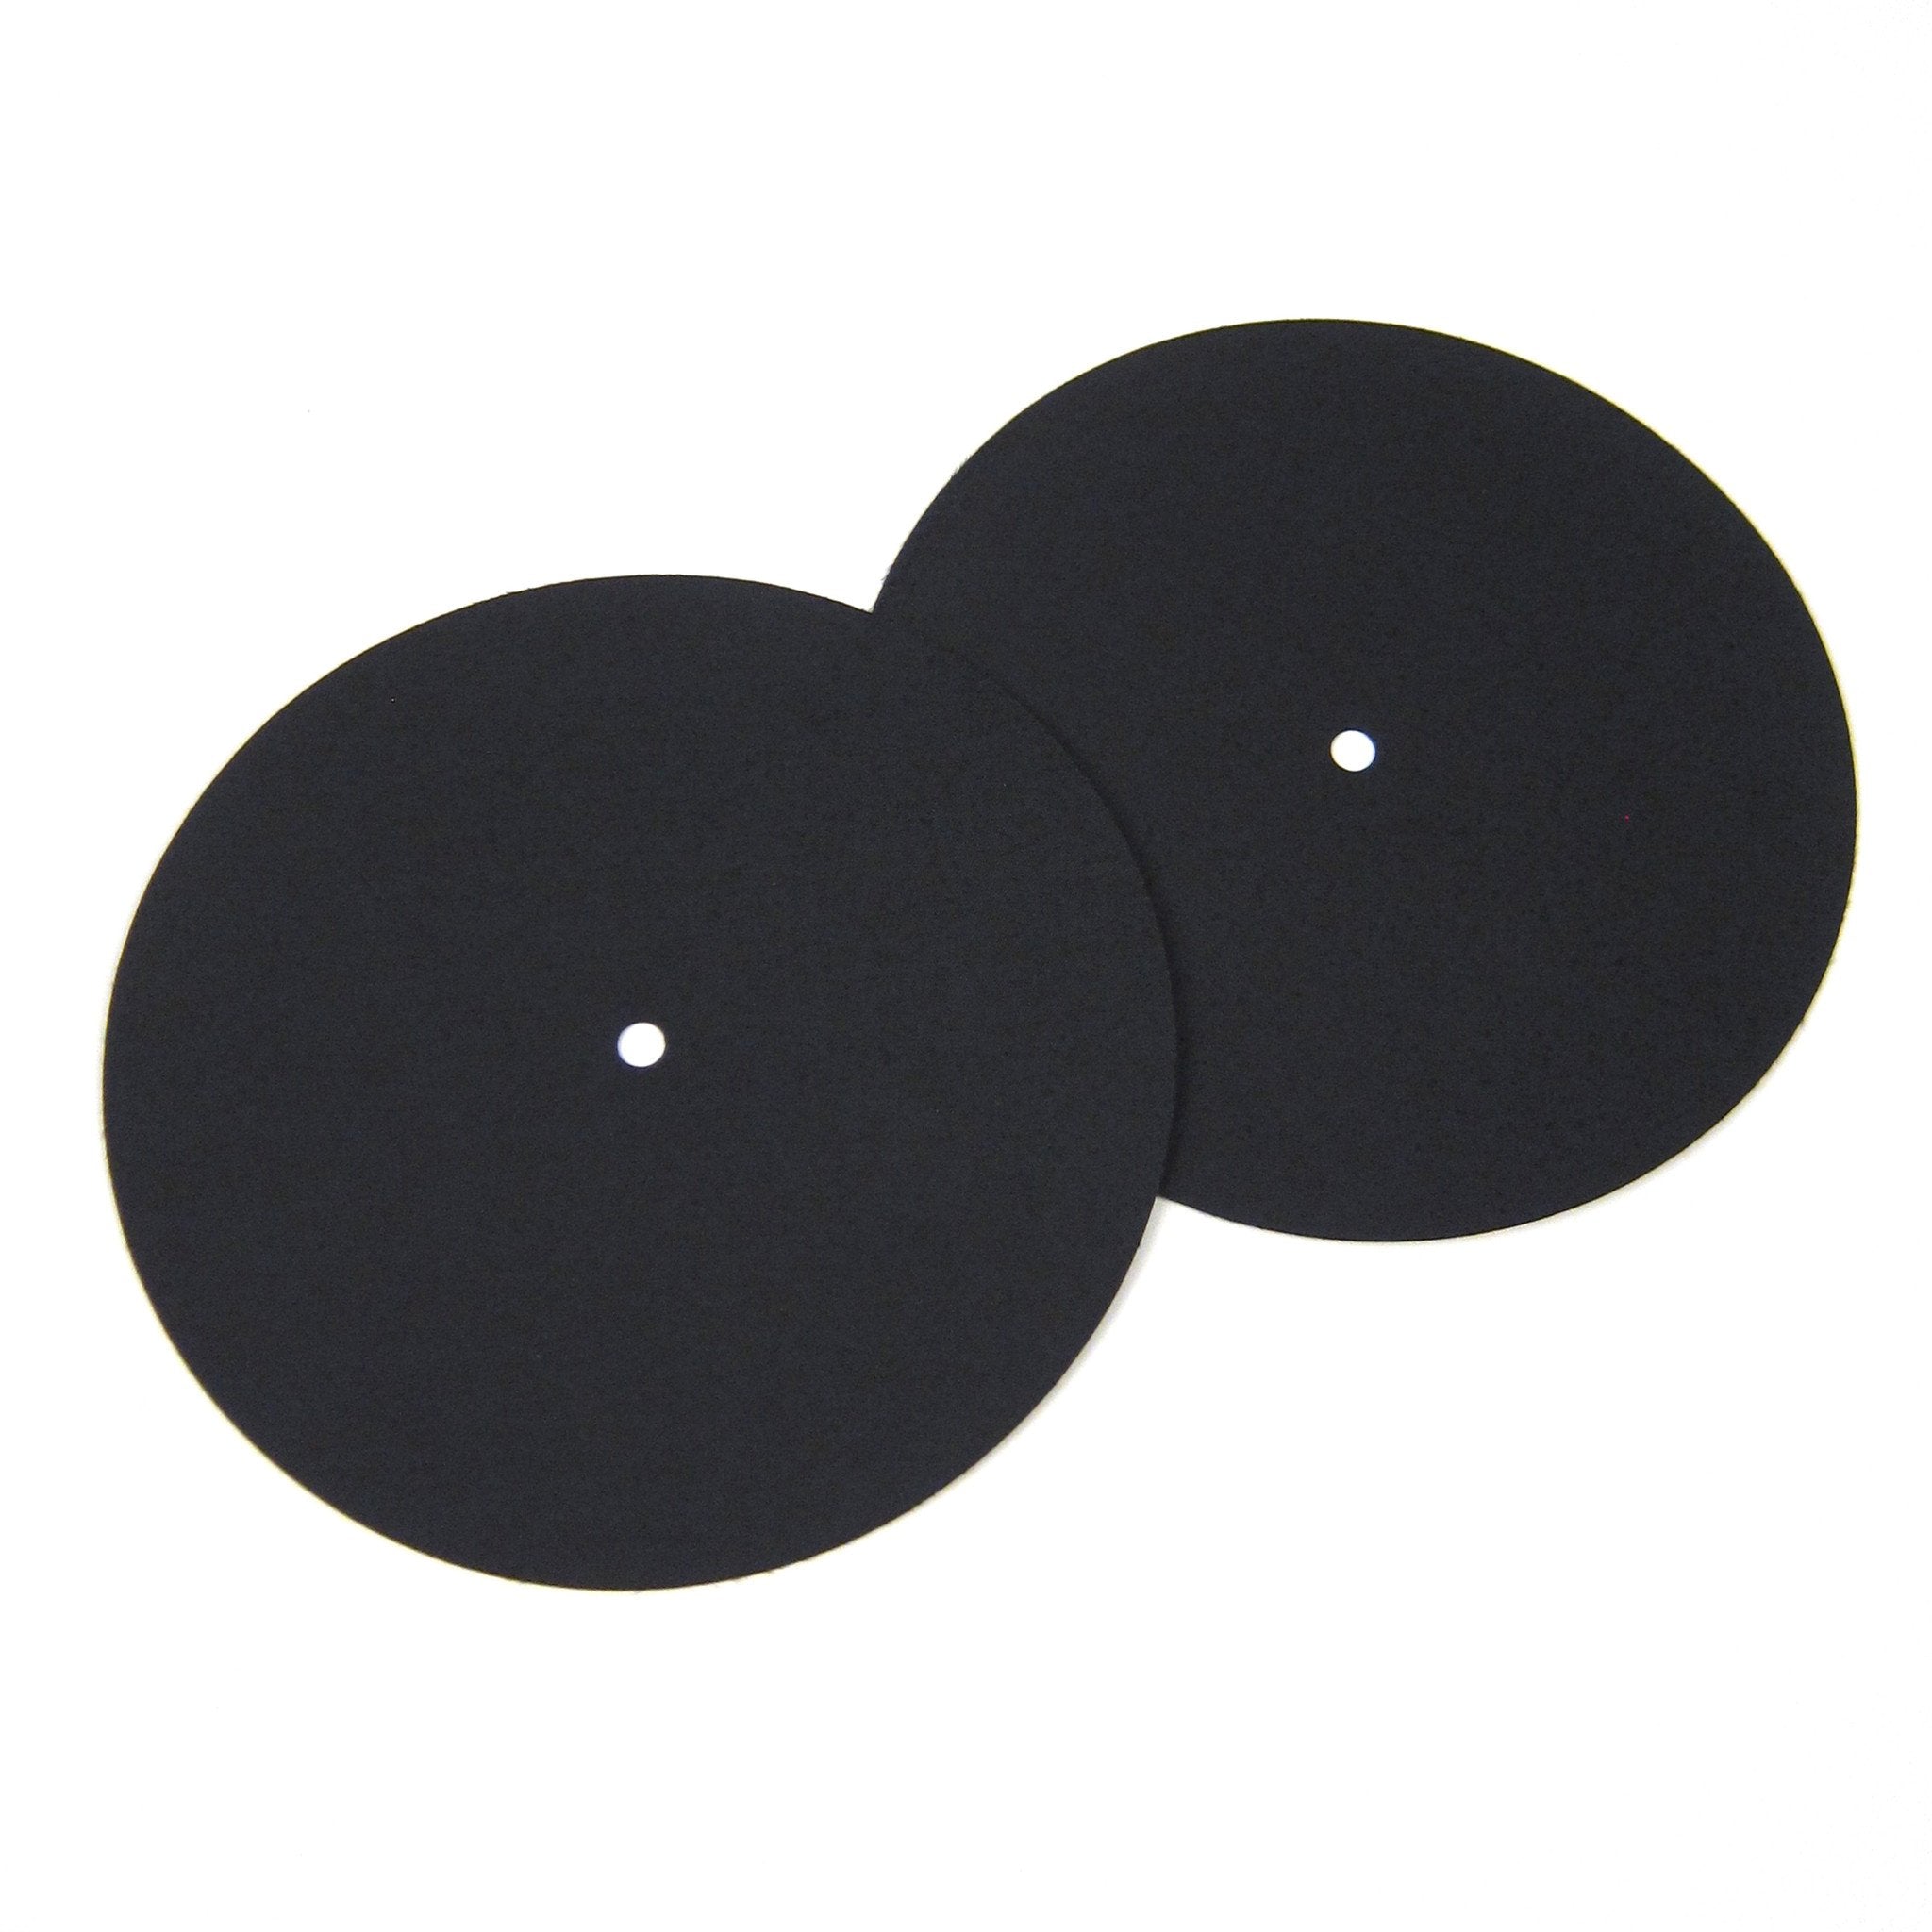 Thud Rumble: Baby Butter Rugs 7" (Pair) - Black